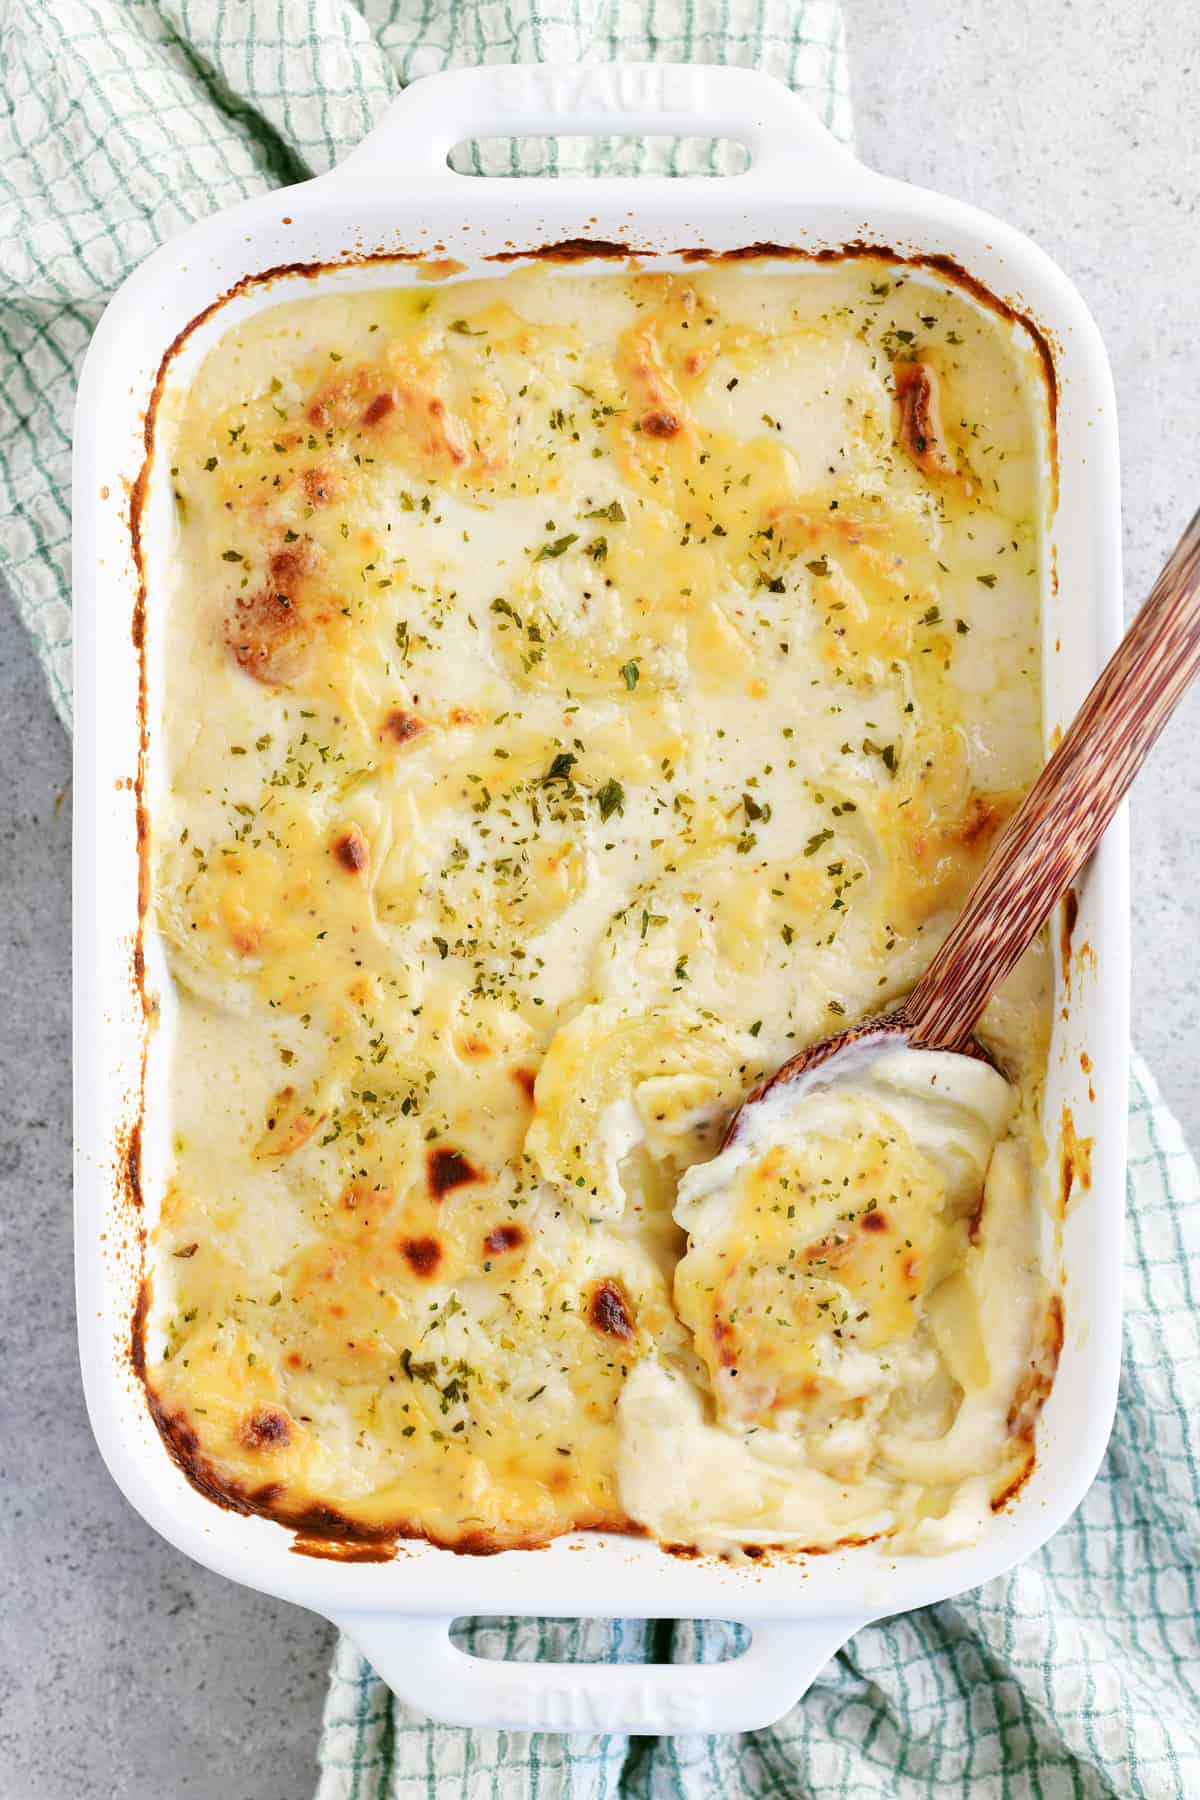 a spoon dipped into the cooked scalloped potatoes